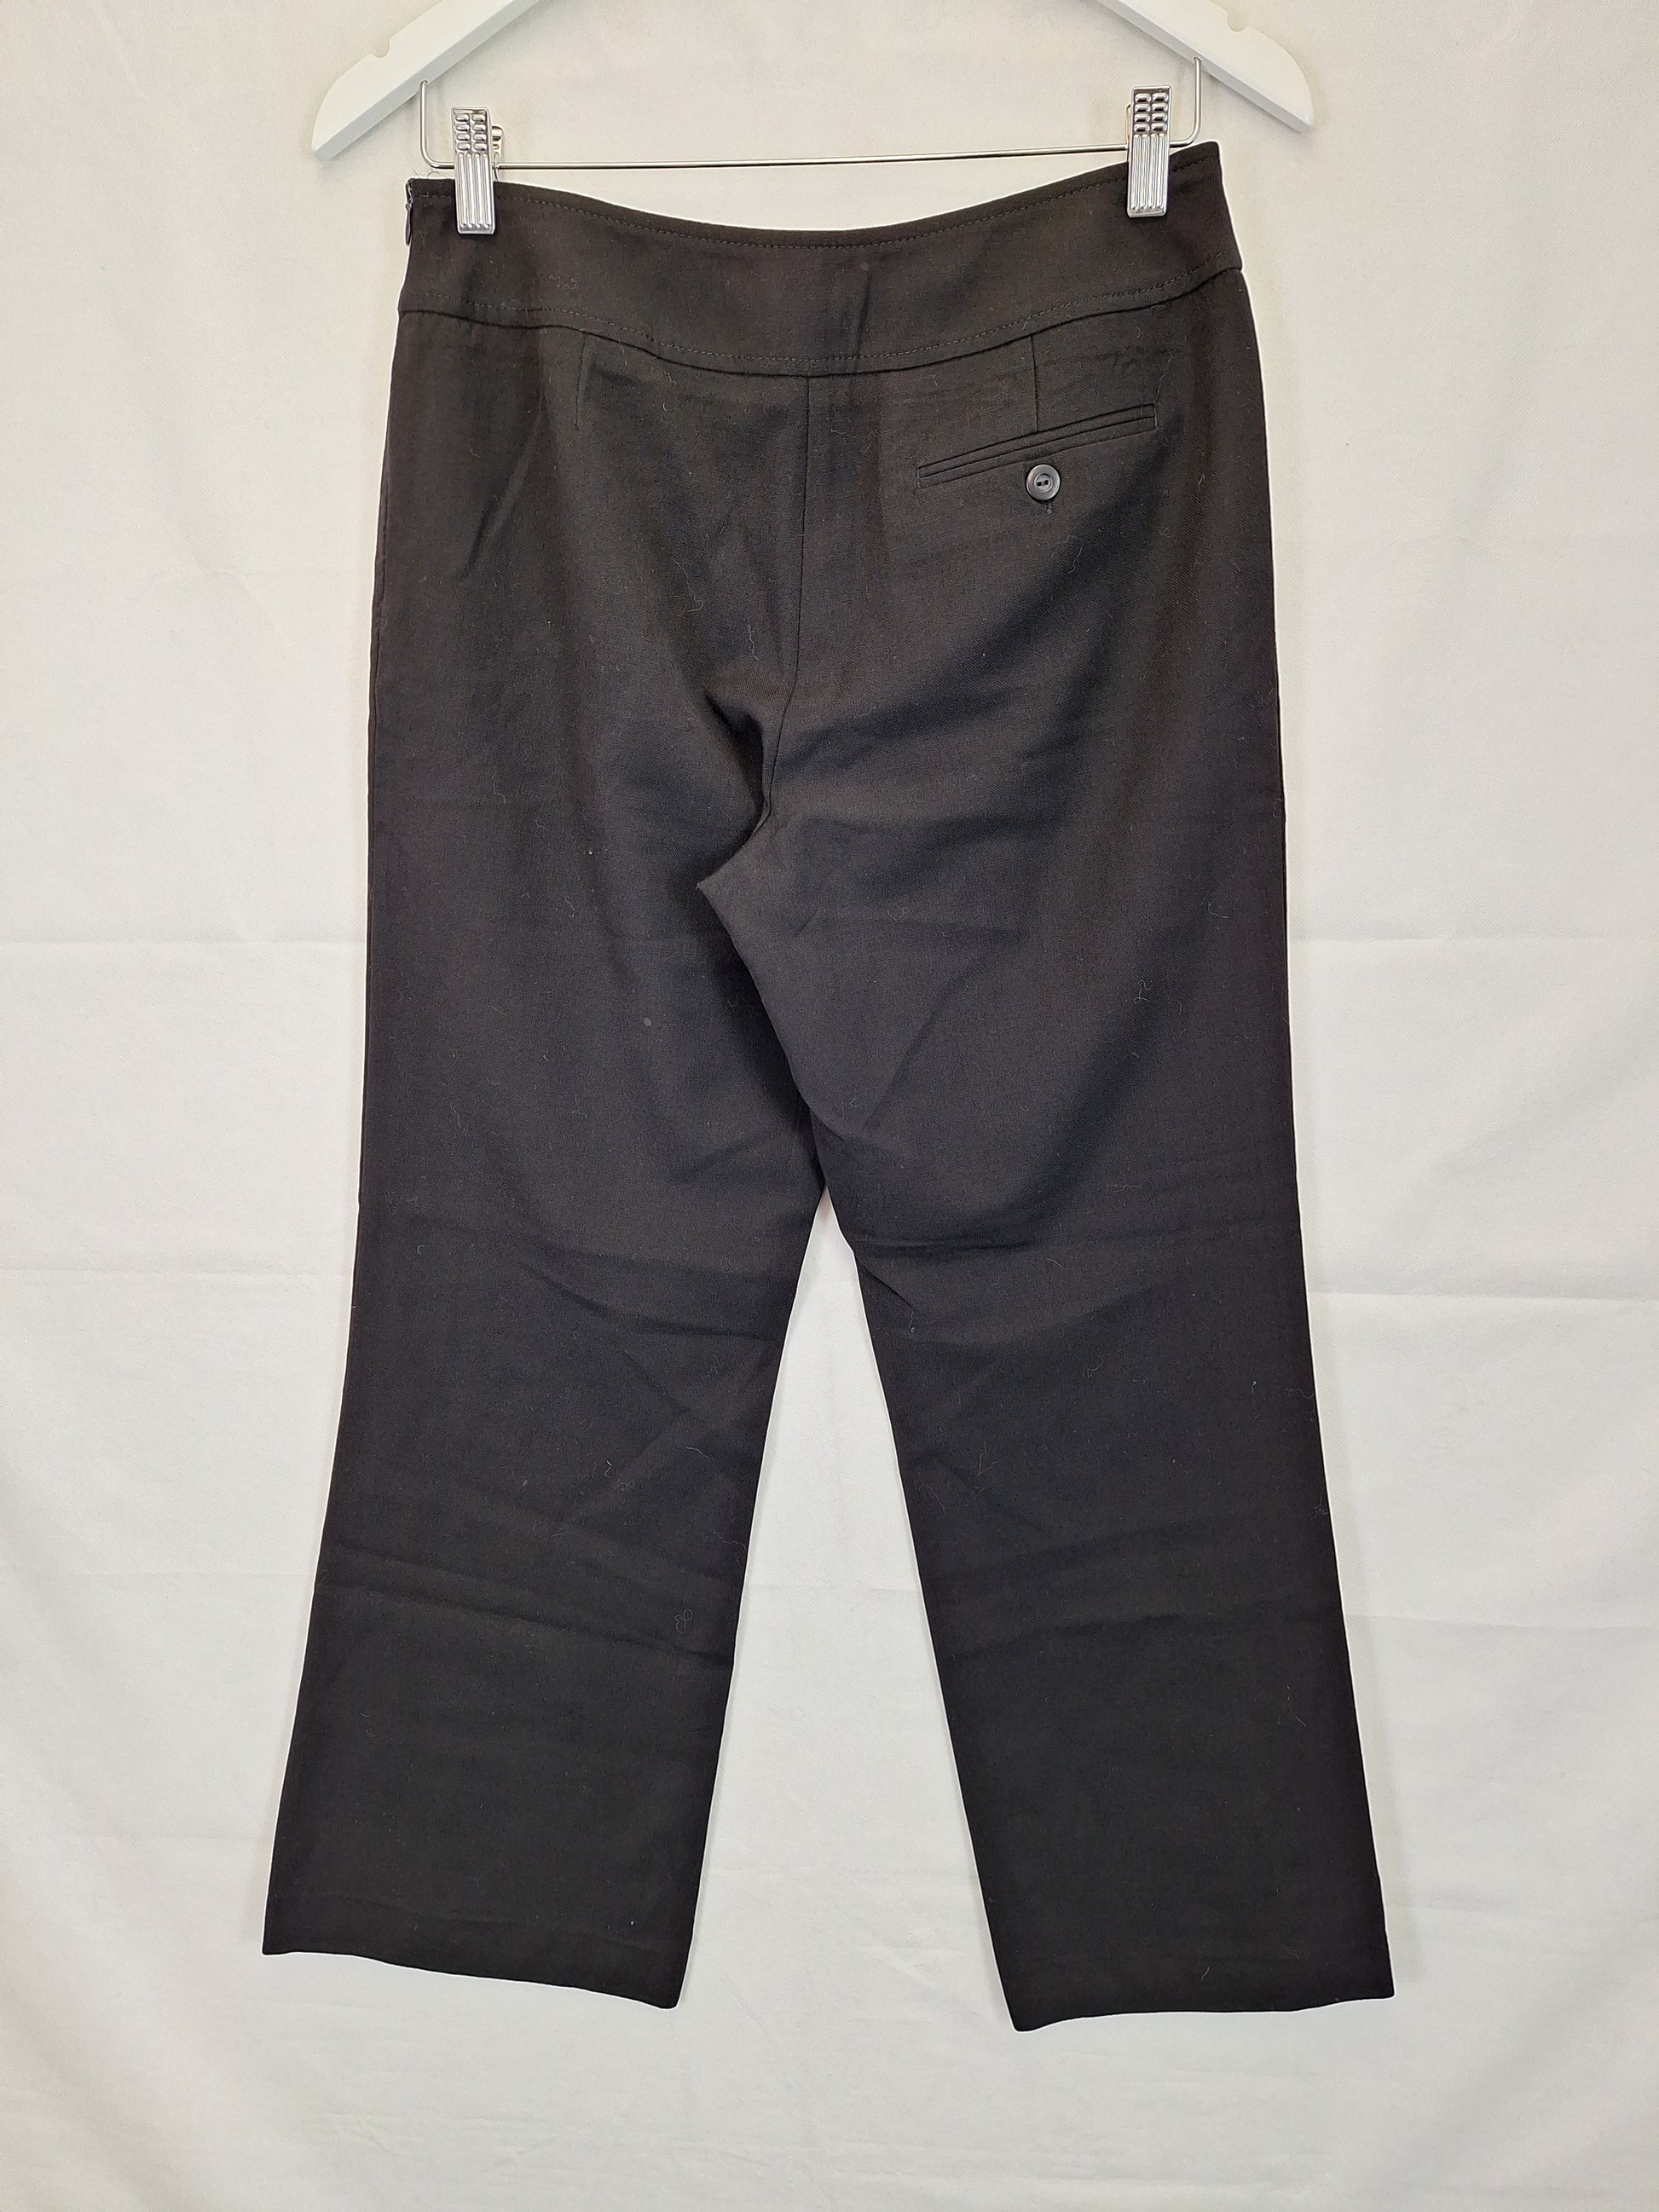 Country Road Vintage Must Have Pants Size 8 – SwapUp